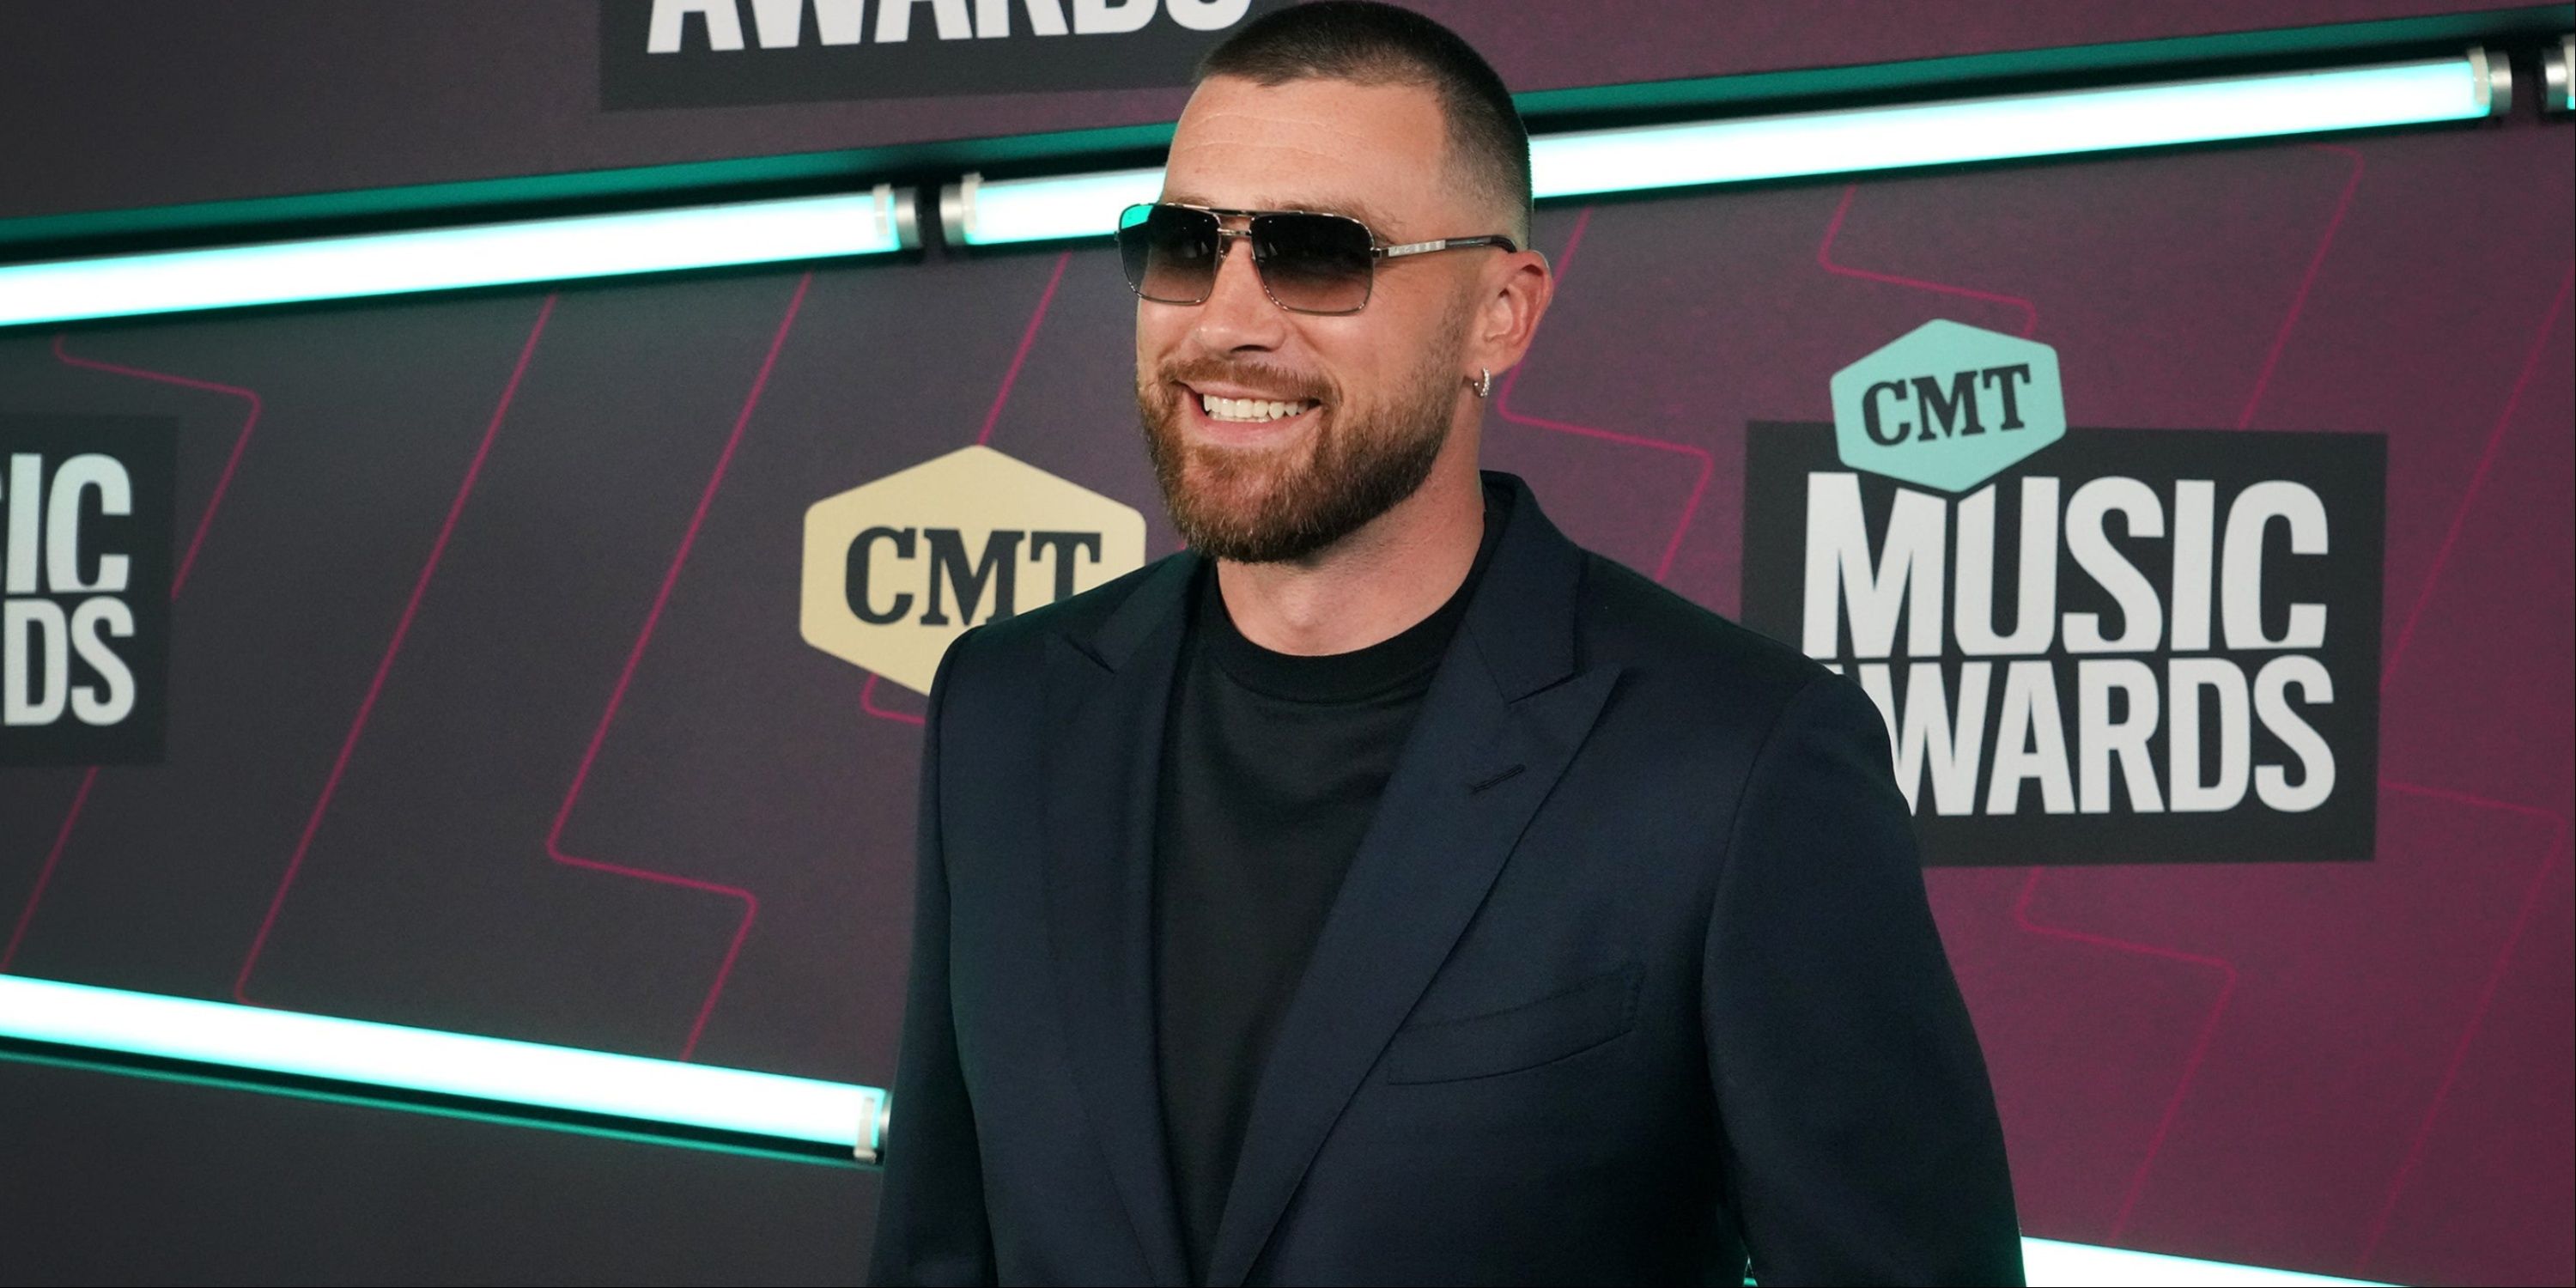 Kansas City Chiefs tight end Travis Kelce at the Country Music Awards